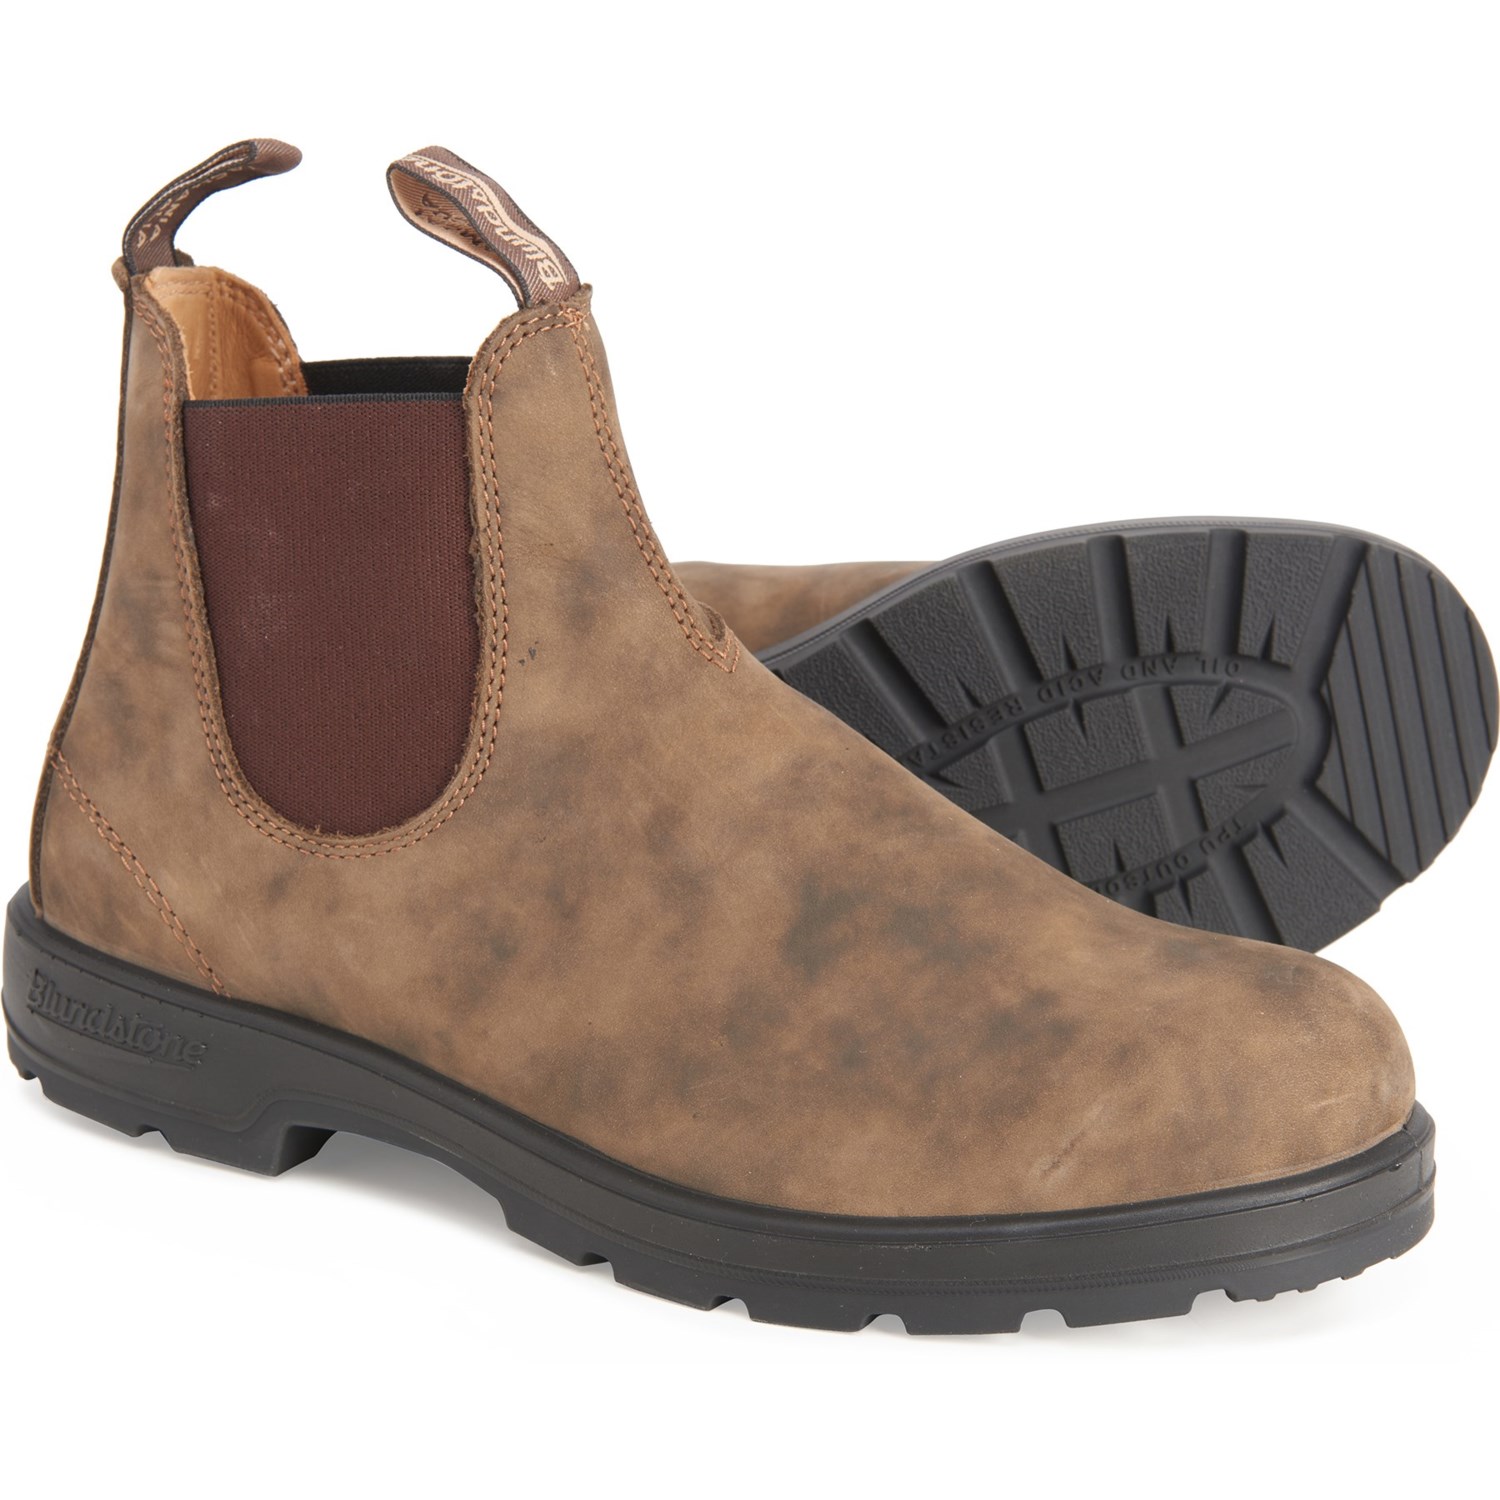 blundstone boots seconds